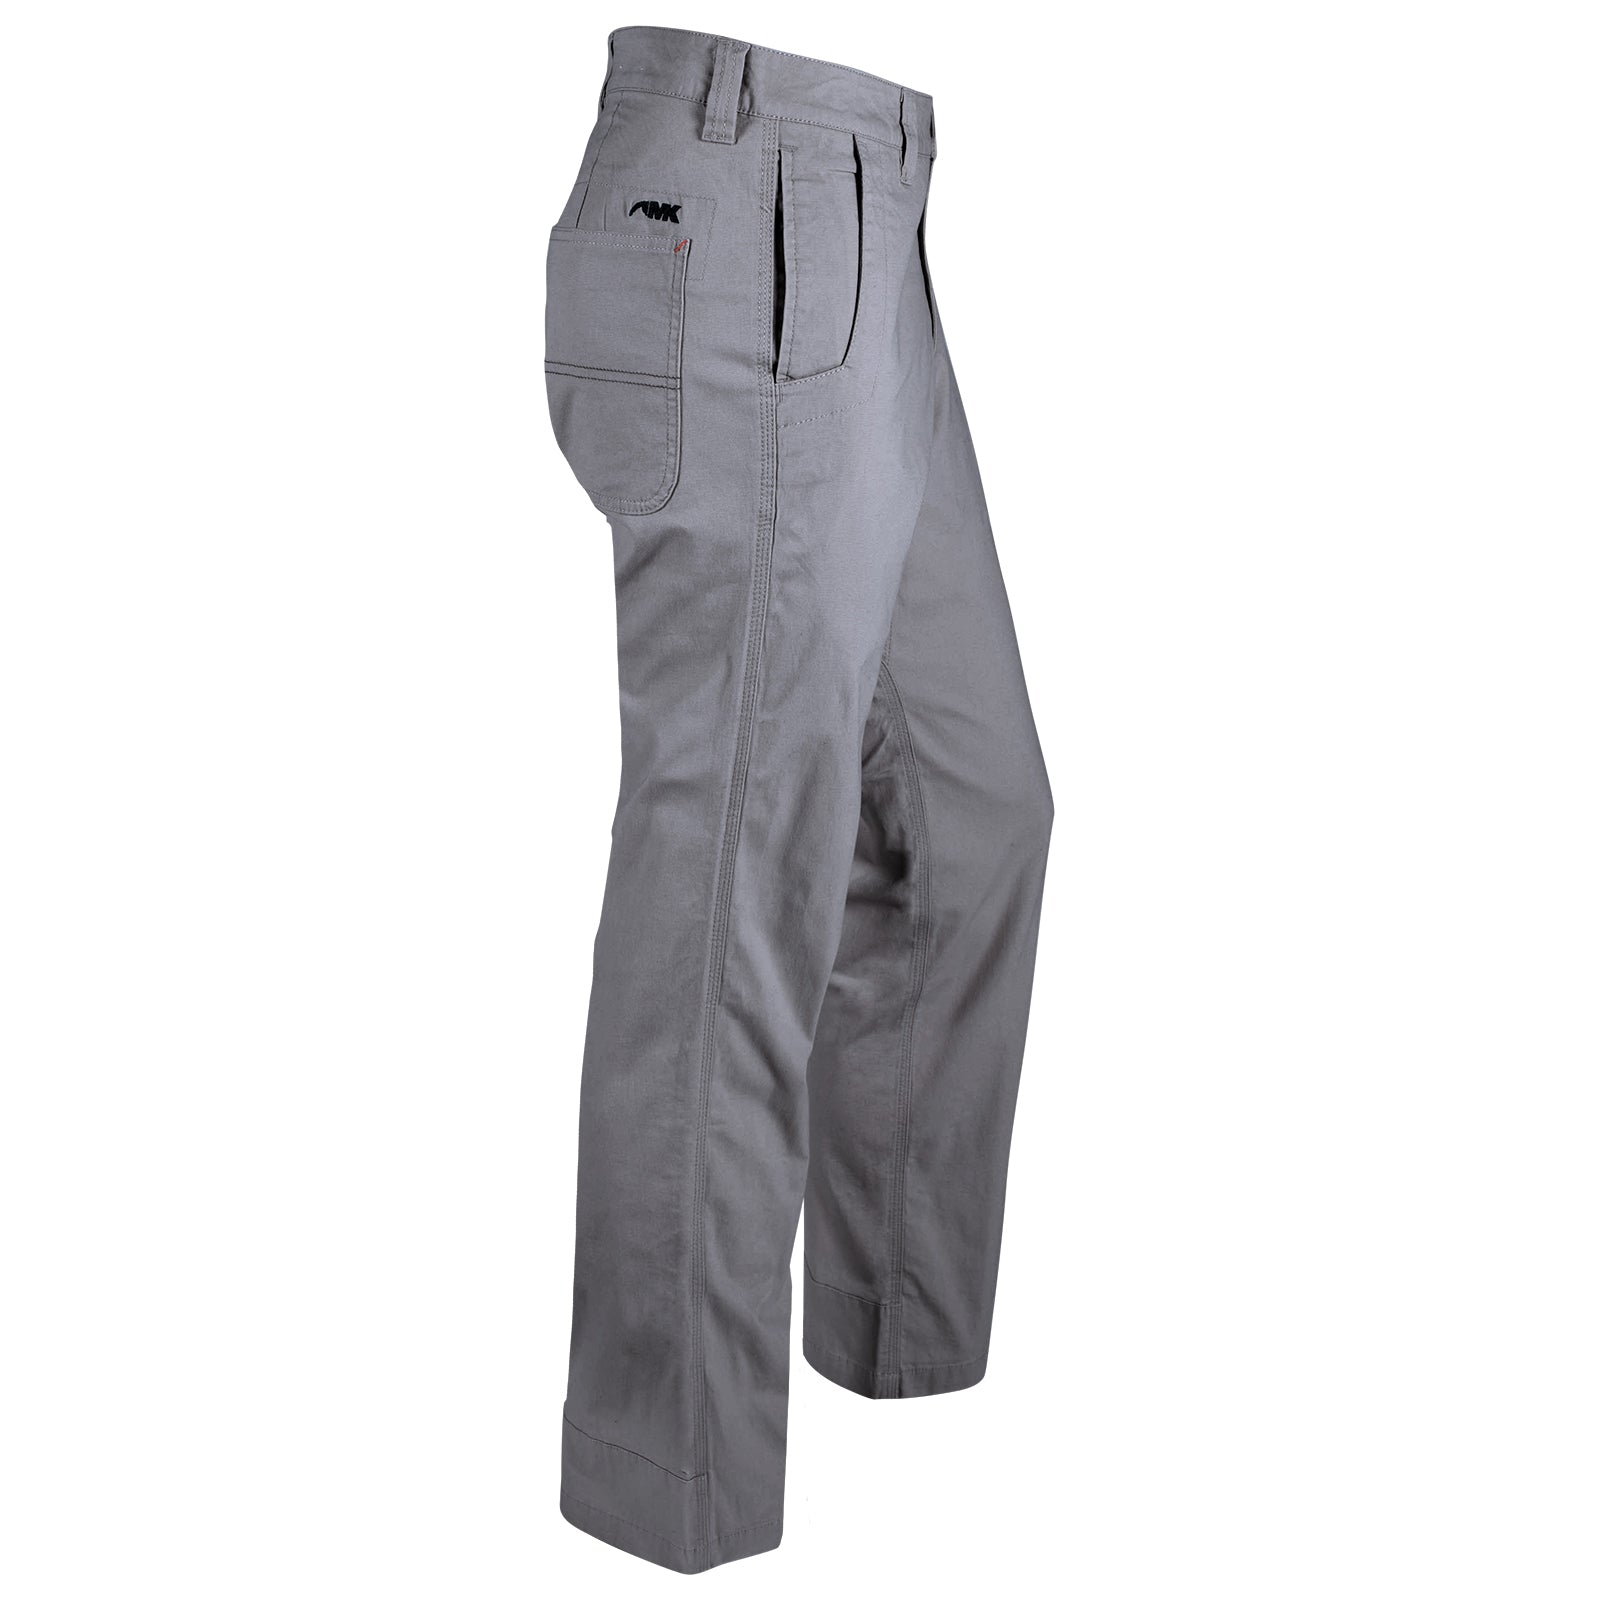 Everyday work trousers made of... - Snickers Workwear UK | Facebook